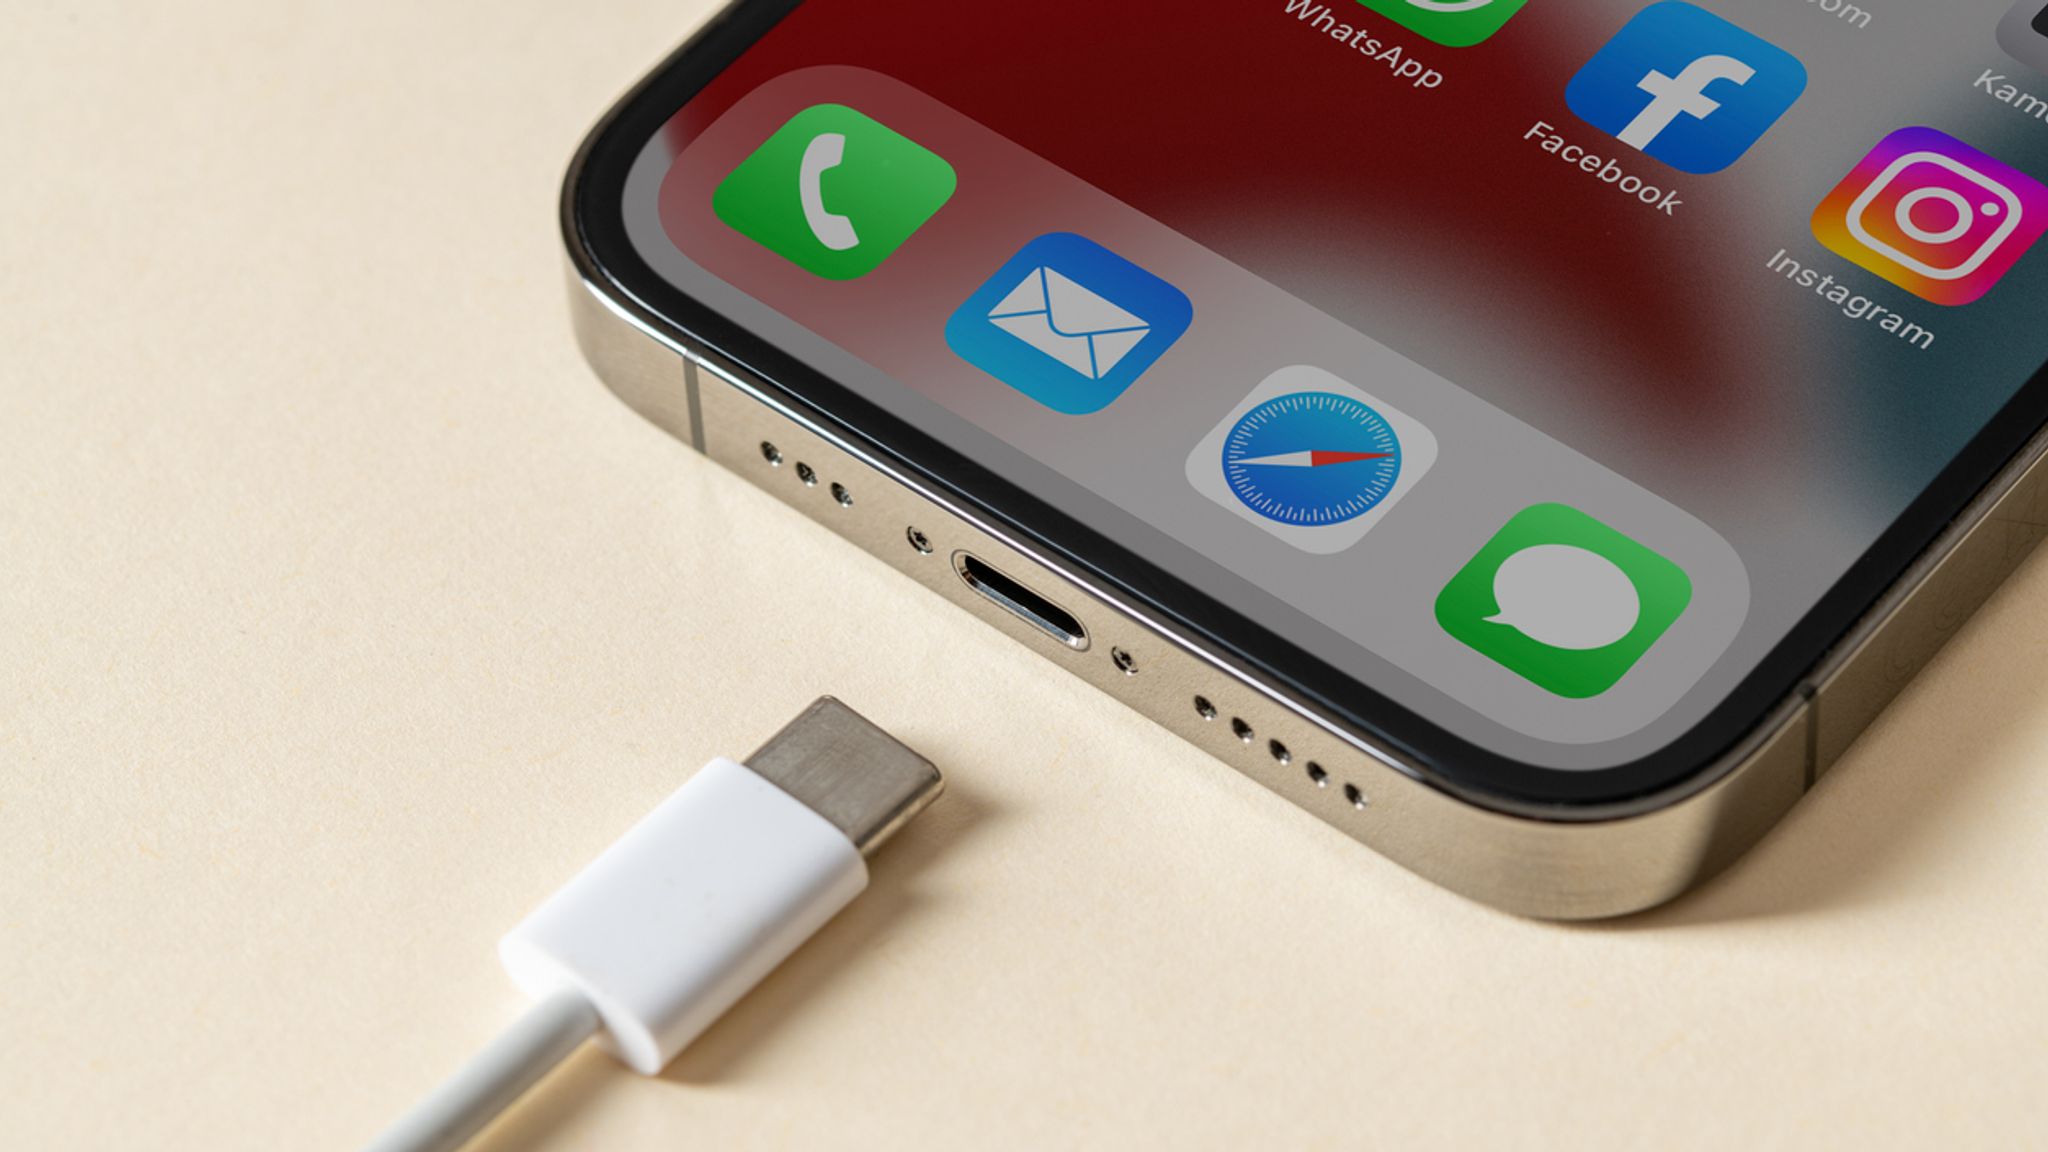 iPhone will feature USB-C charging port, says Apple executive